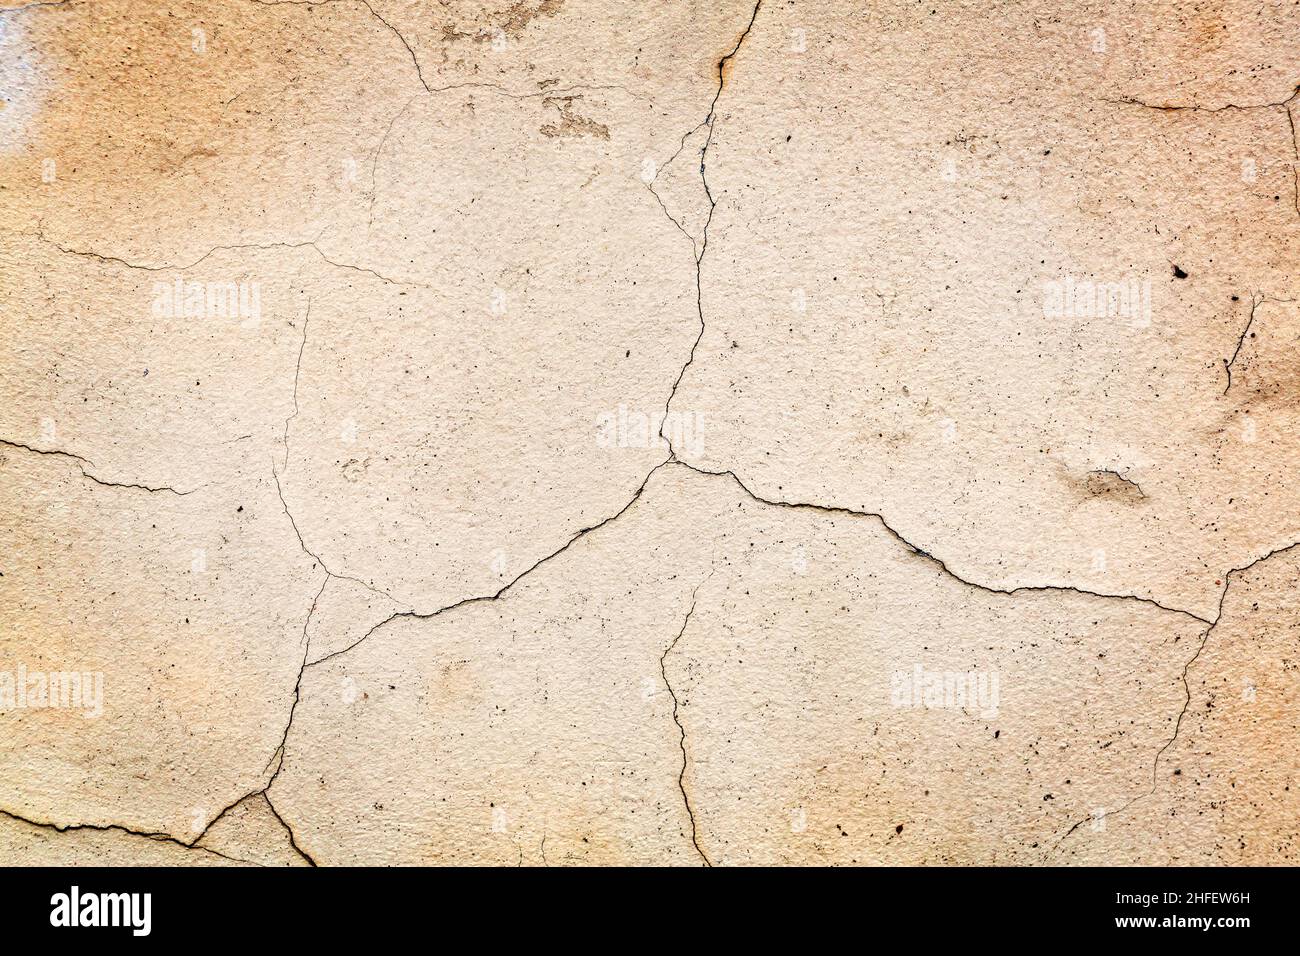 Abstract concrete, weathered with cracks and scratches. Landscape style. Great background or texture. Stock Photo